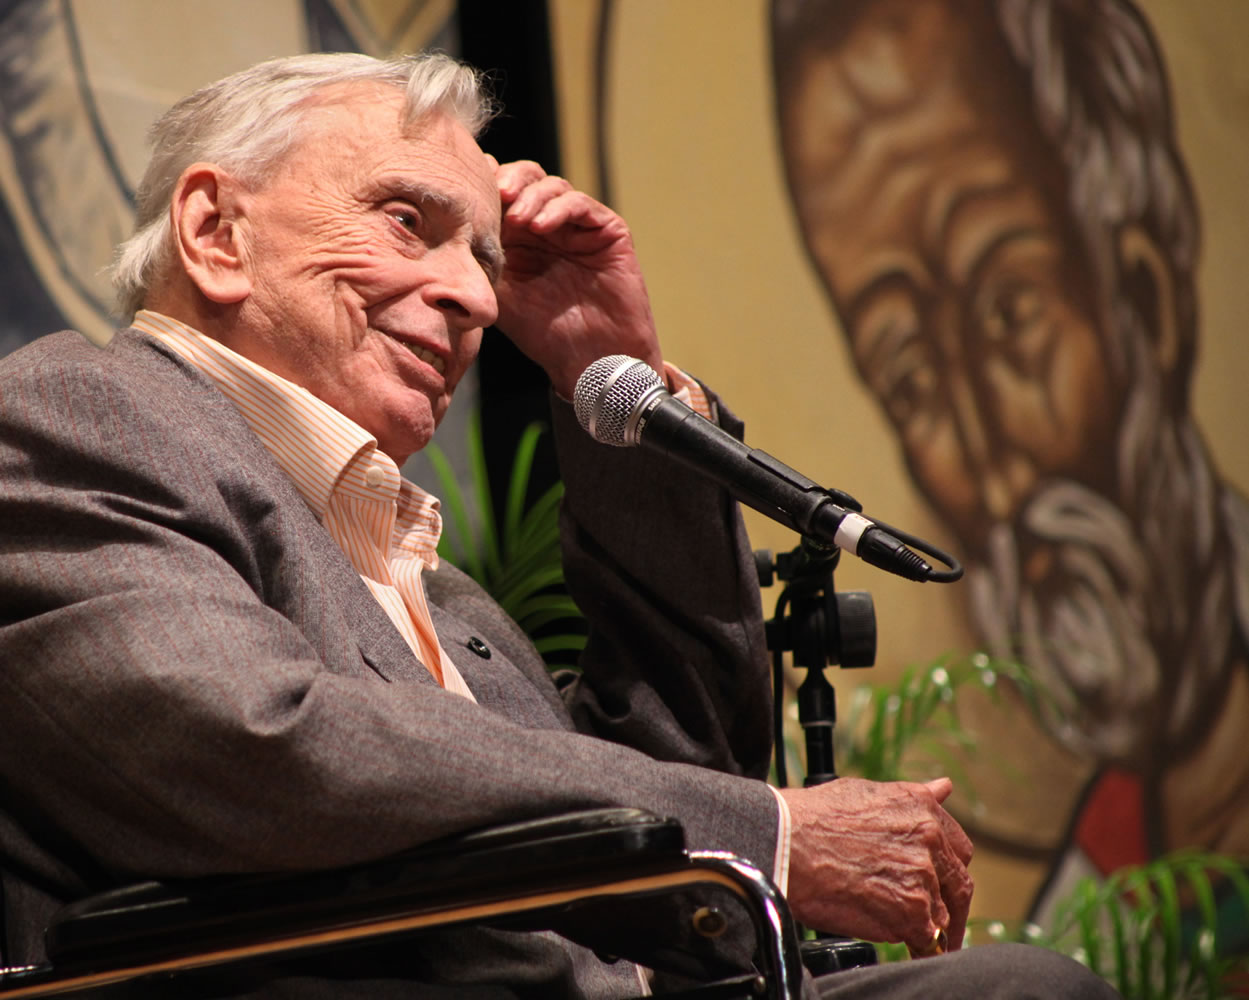 In this 2009 photo, author and essayist Gore Vidal delivers the keynote presentation during the first session of the 27th annual Key West Literary Seminar in Key West, Fla. Vidal died Tuesday at his home in Los Angeles.